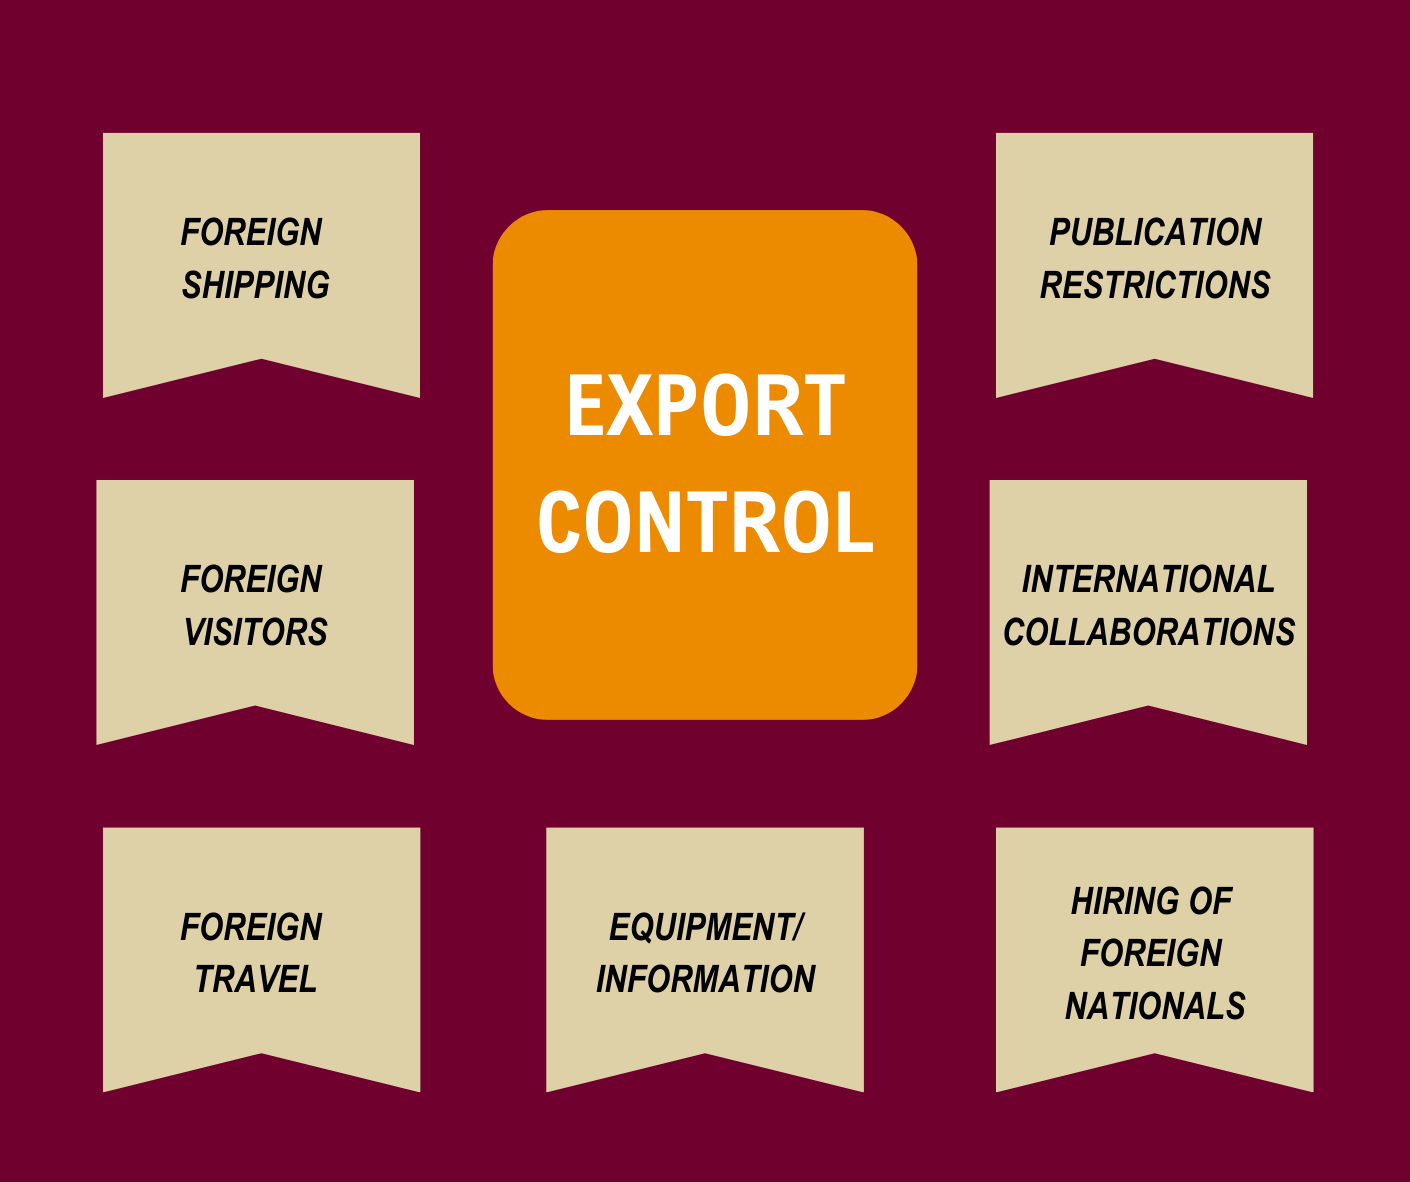 Export Control addresses a range of activities and issues, including Foreign Shipping, Equipment/Information, Foreign Visitors Foreign Travel, Hiring of Foreign Nationals, International Collaborations, Publication Restrictions